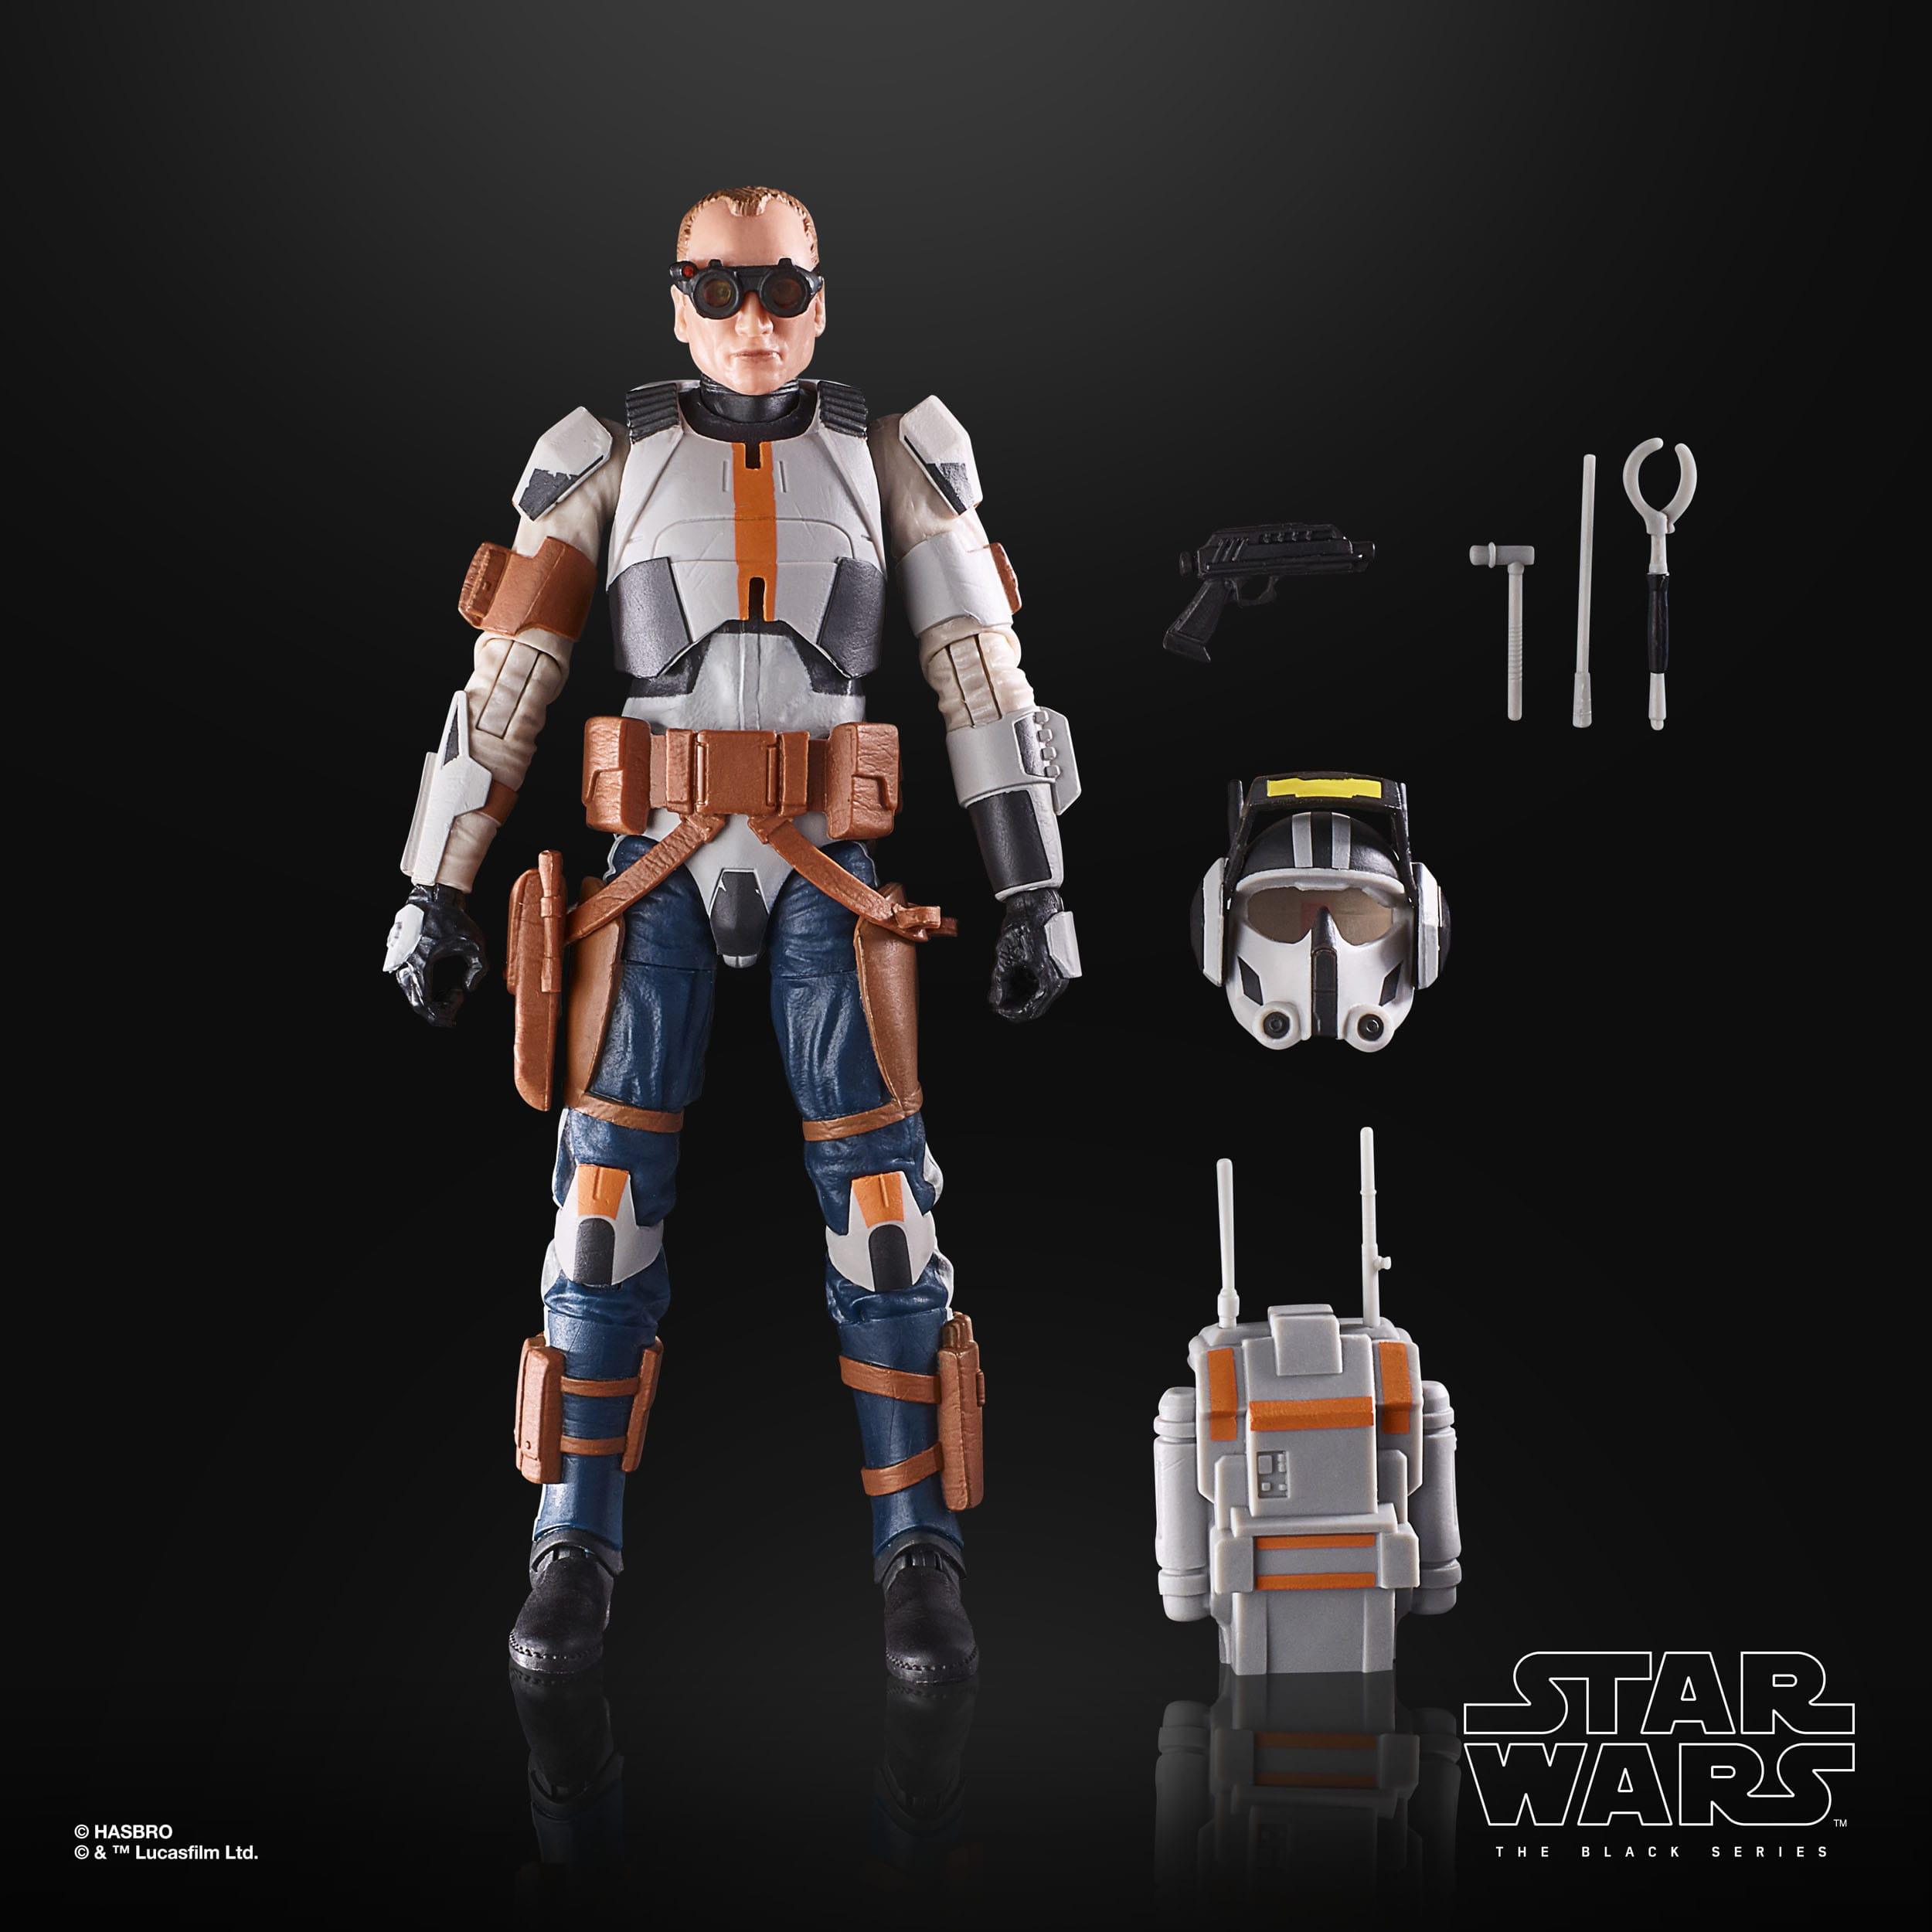 Star Wars The Bad Batch: The Black Series Hunter (Mercenary Gear) Kids Toy  Action Figure for Boys and Girls (9”)